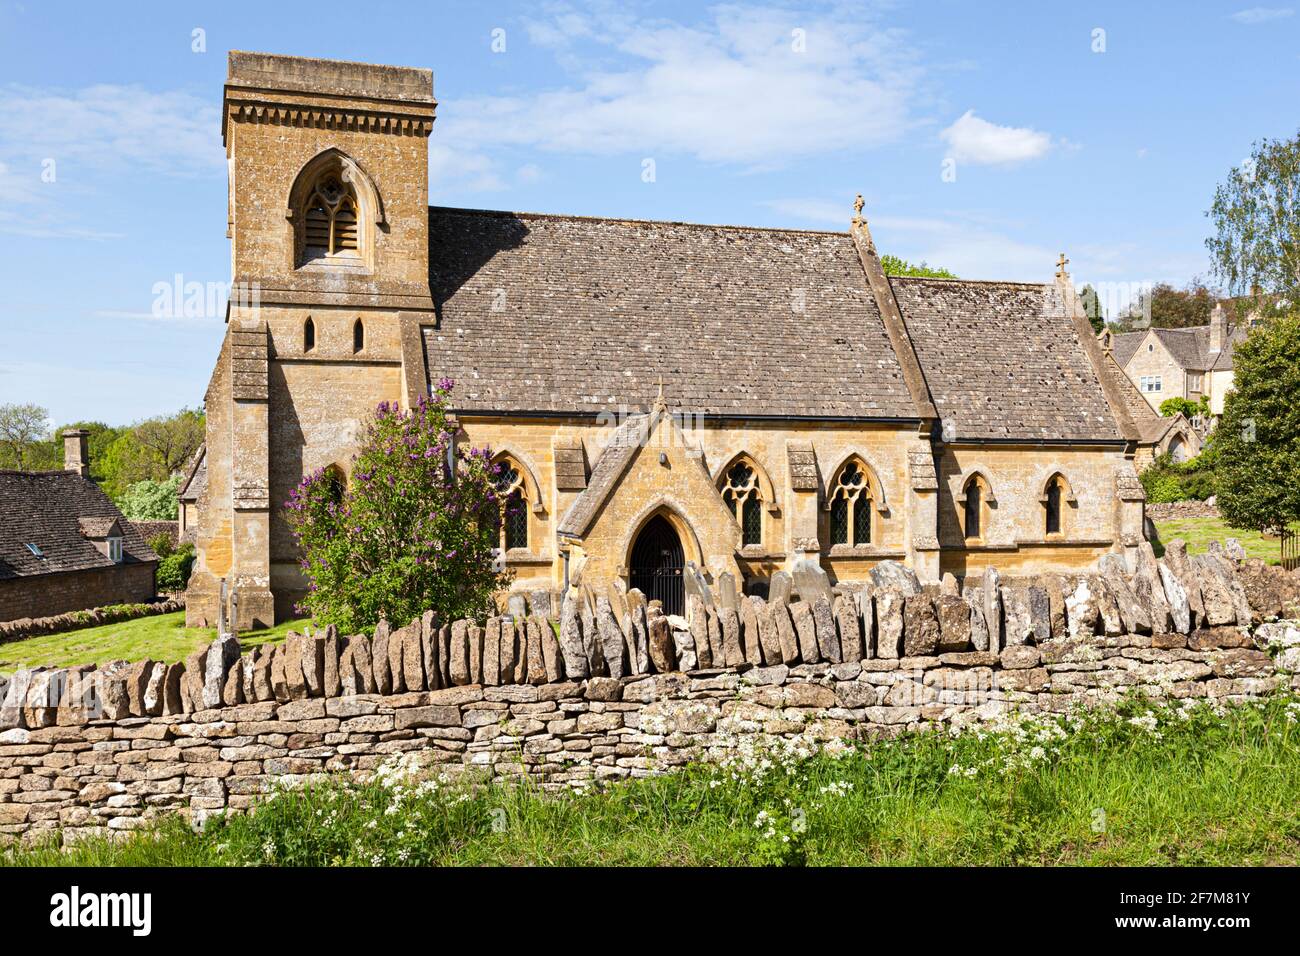 St Barnabas church in the Cotswold village of Snowshill, Gloucestershire UK Stock Photo